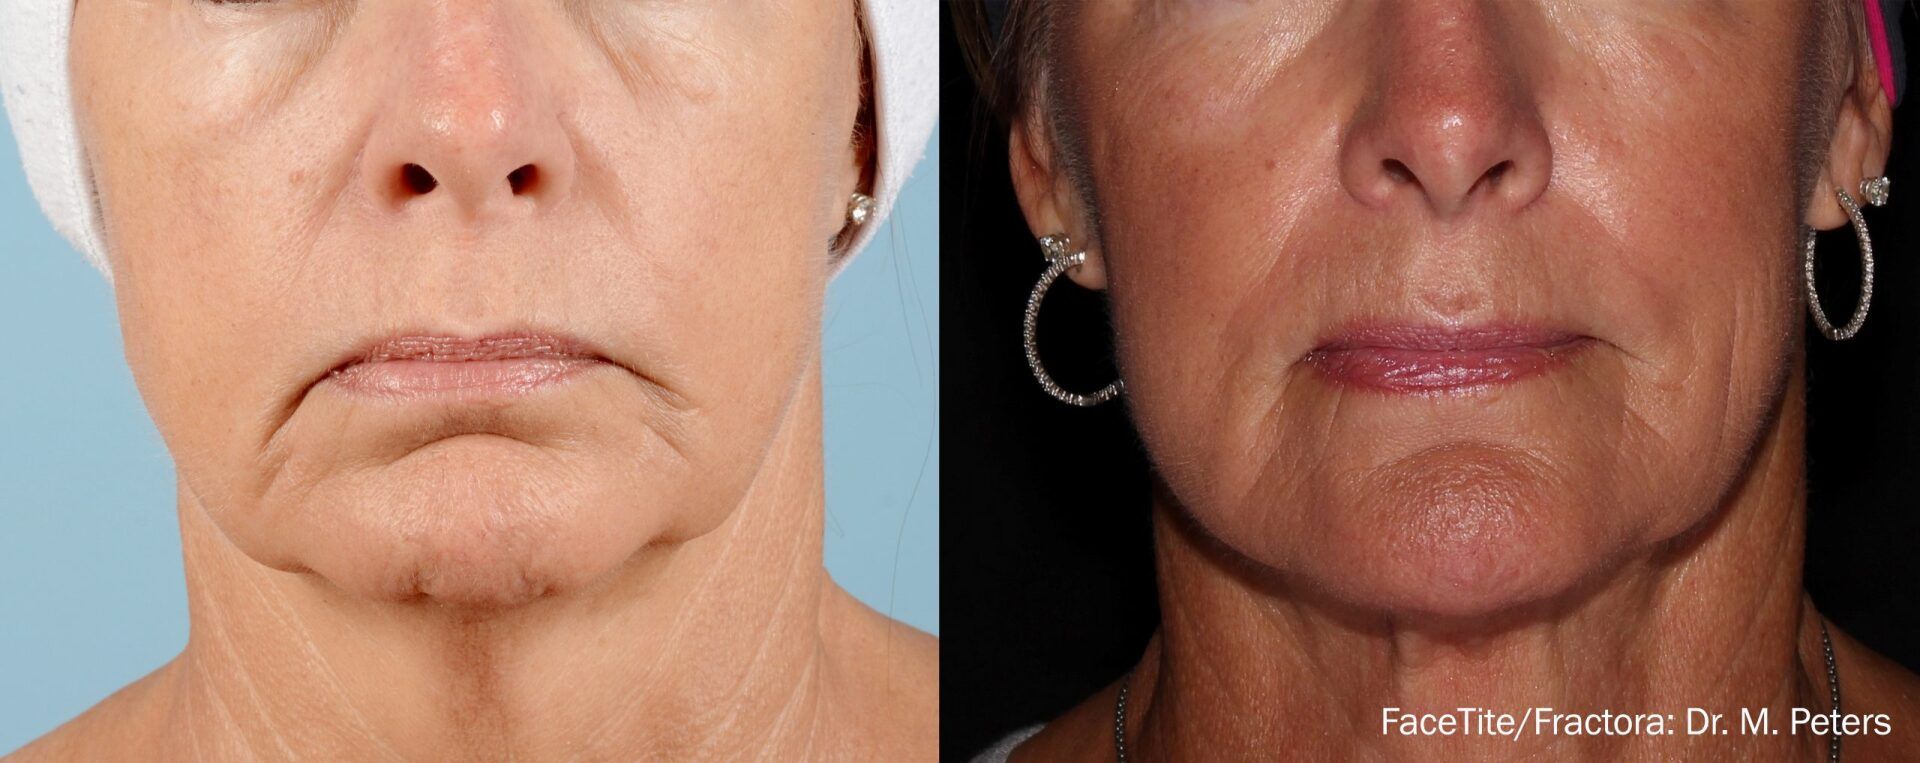 woman's under-chin before and after FaceTite treatment